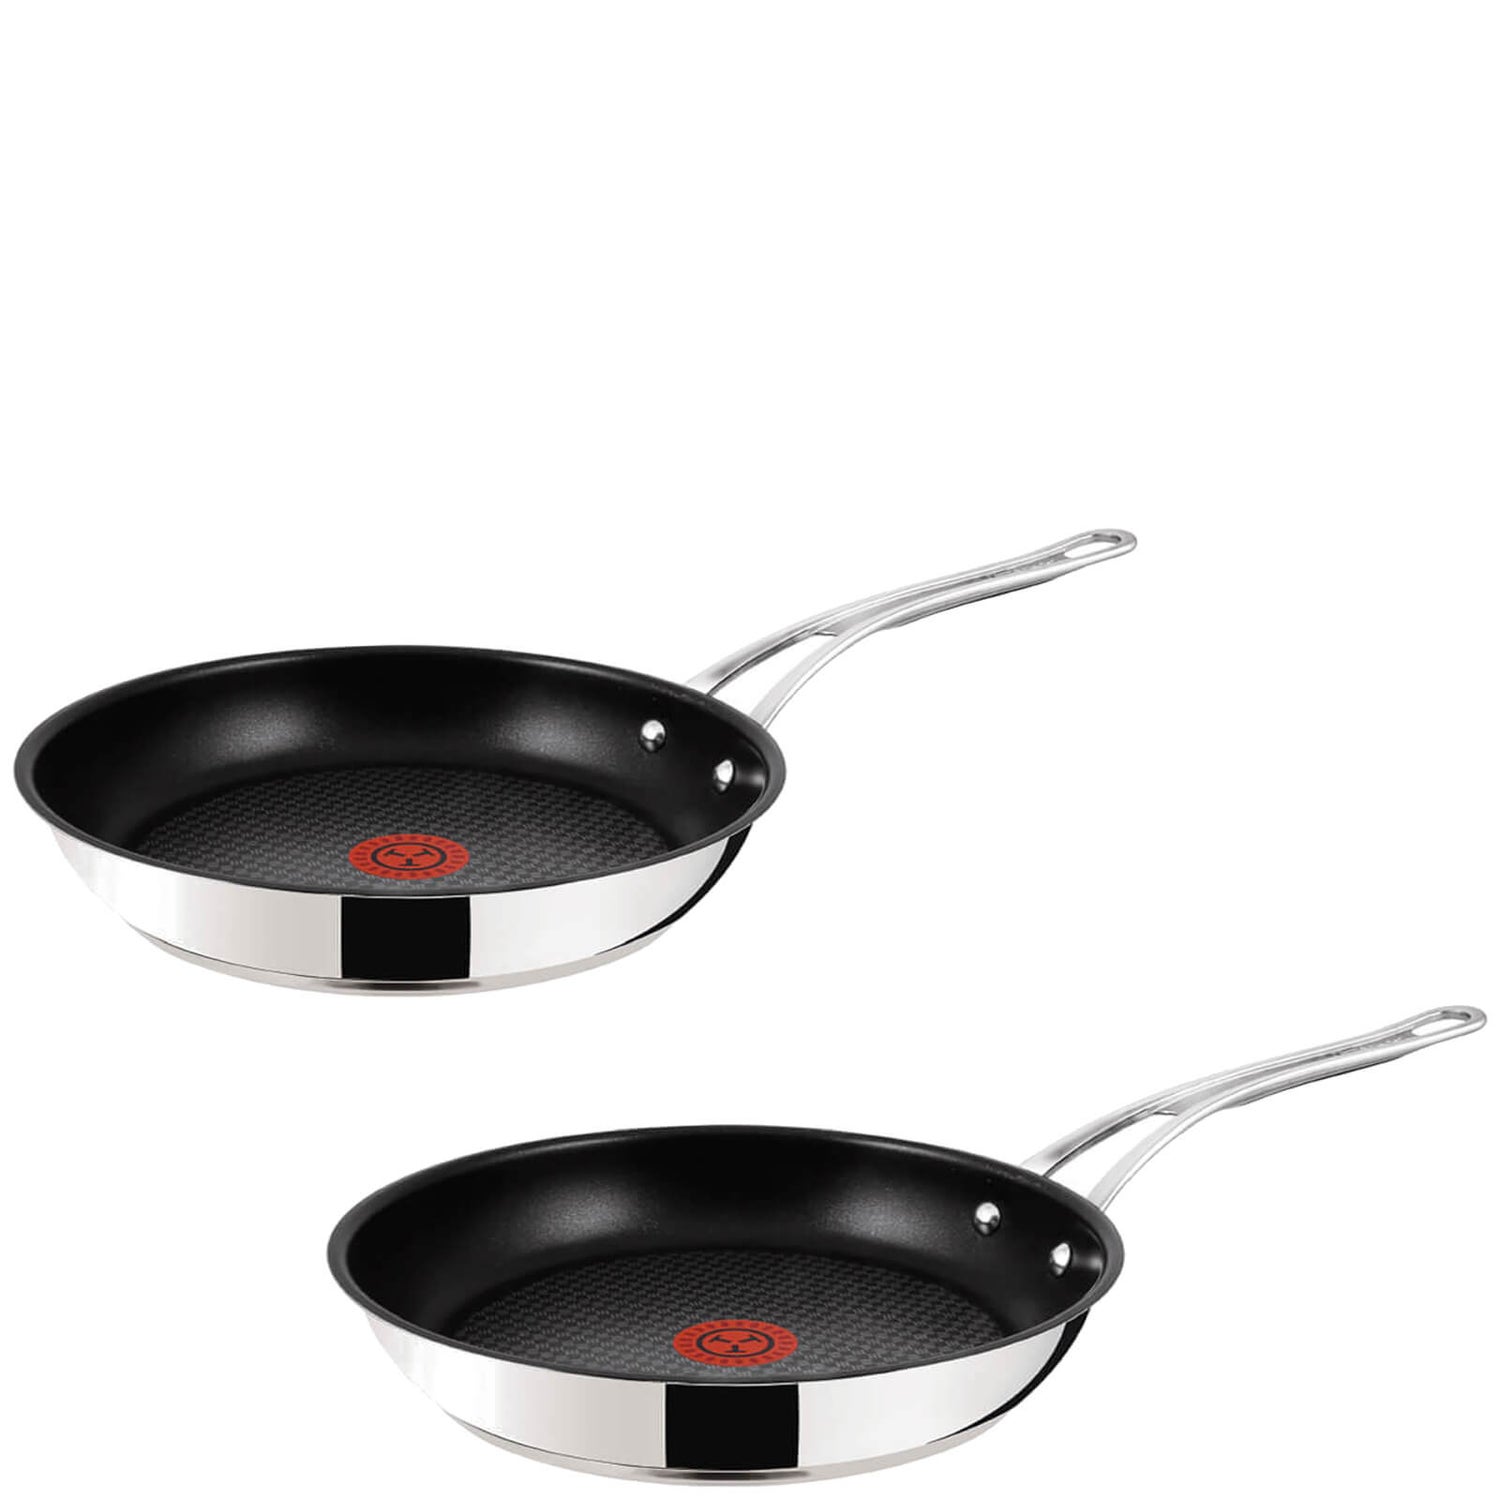 Tefal Jamie Oliver Cook's Direct Stainless Steel, 2 Piece Frying Pan Set,  24 & 28cm, Non-Stick Coating, Heat Indicator, Riveted Safe-Grip Handle